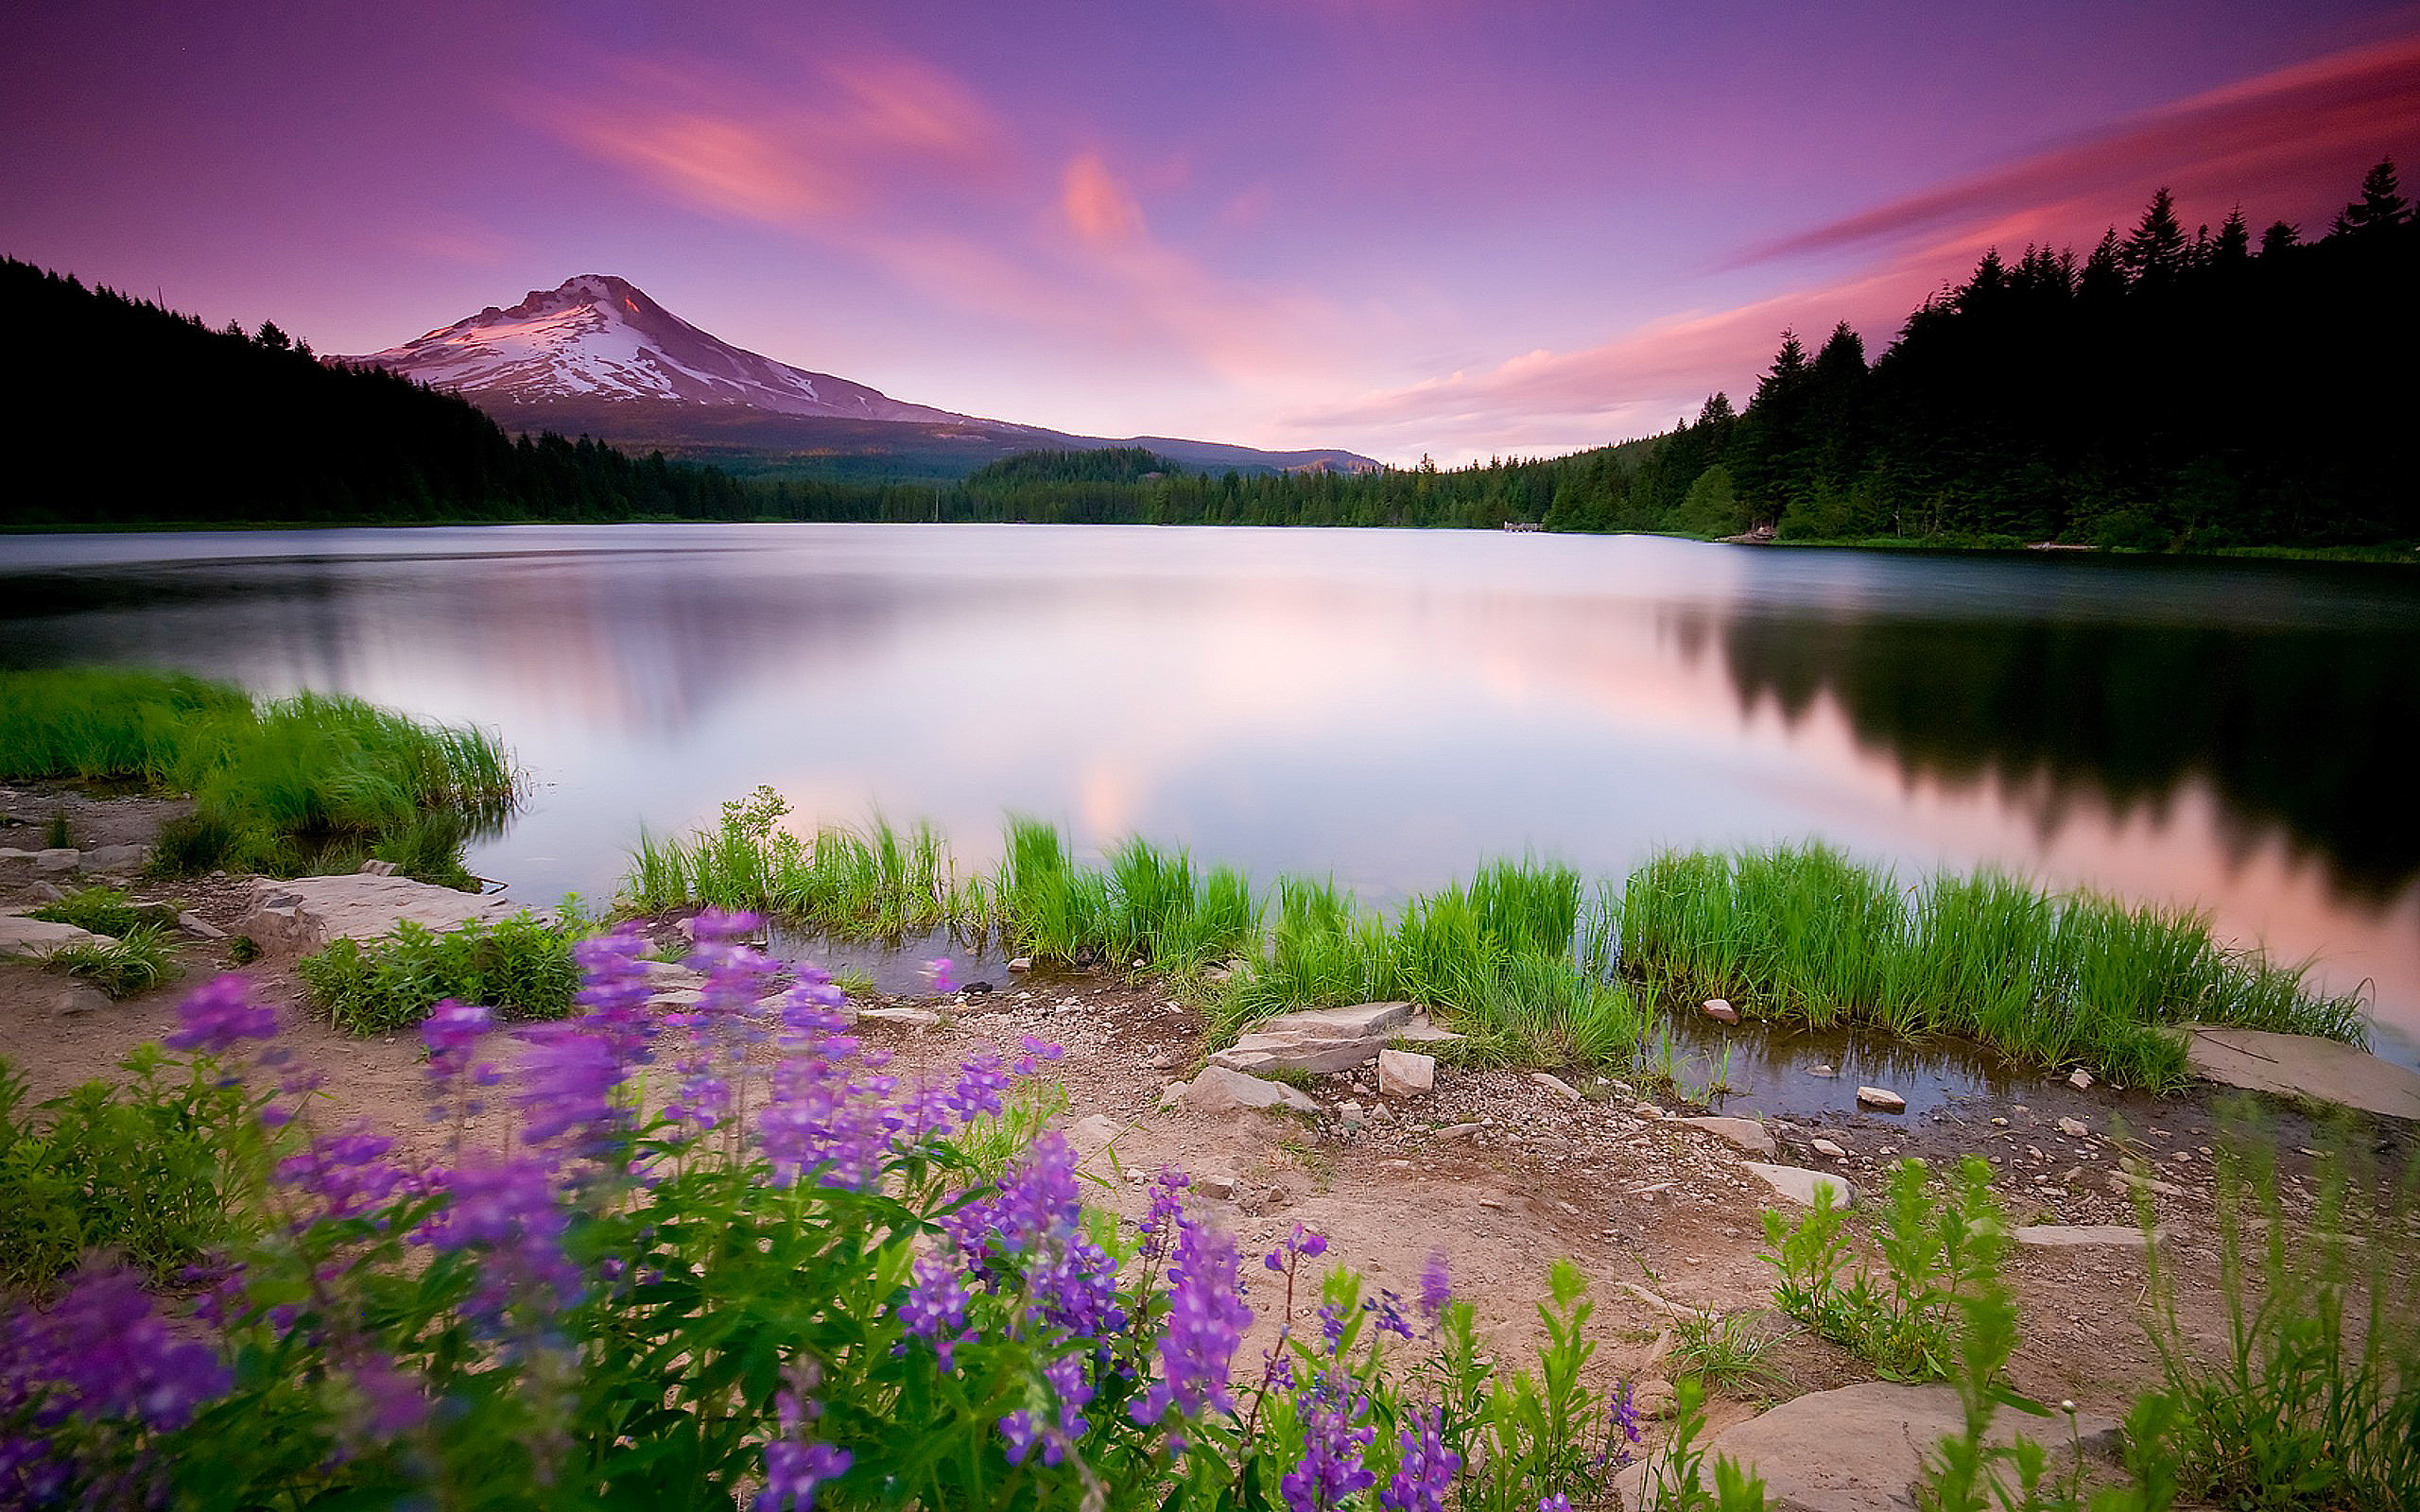 Landscape wallpapers 4 150x150 Wallpaper, free landscape Wallpapers images, pictures download